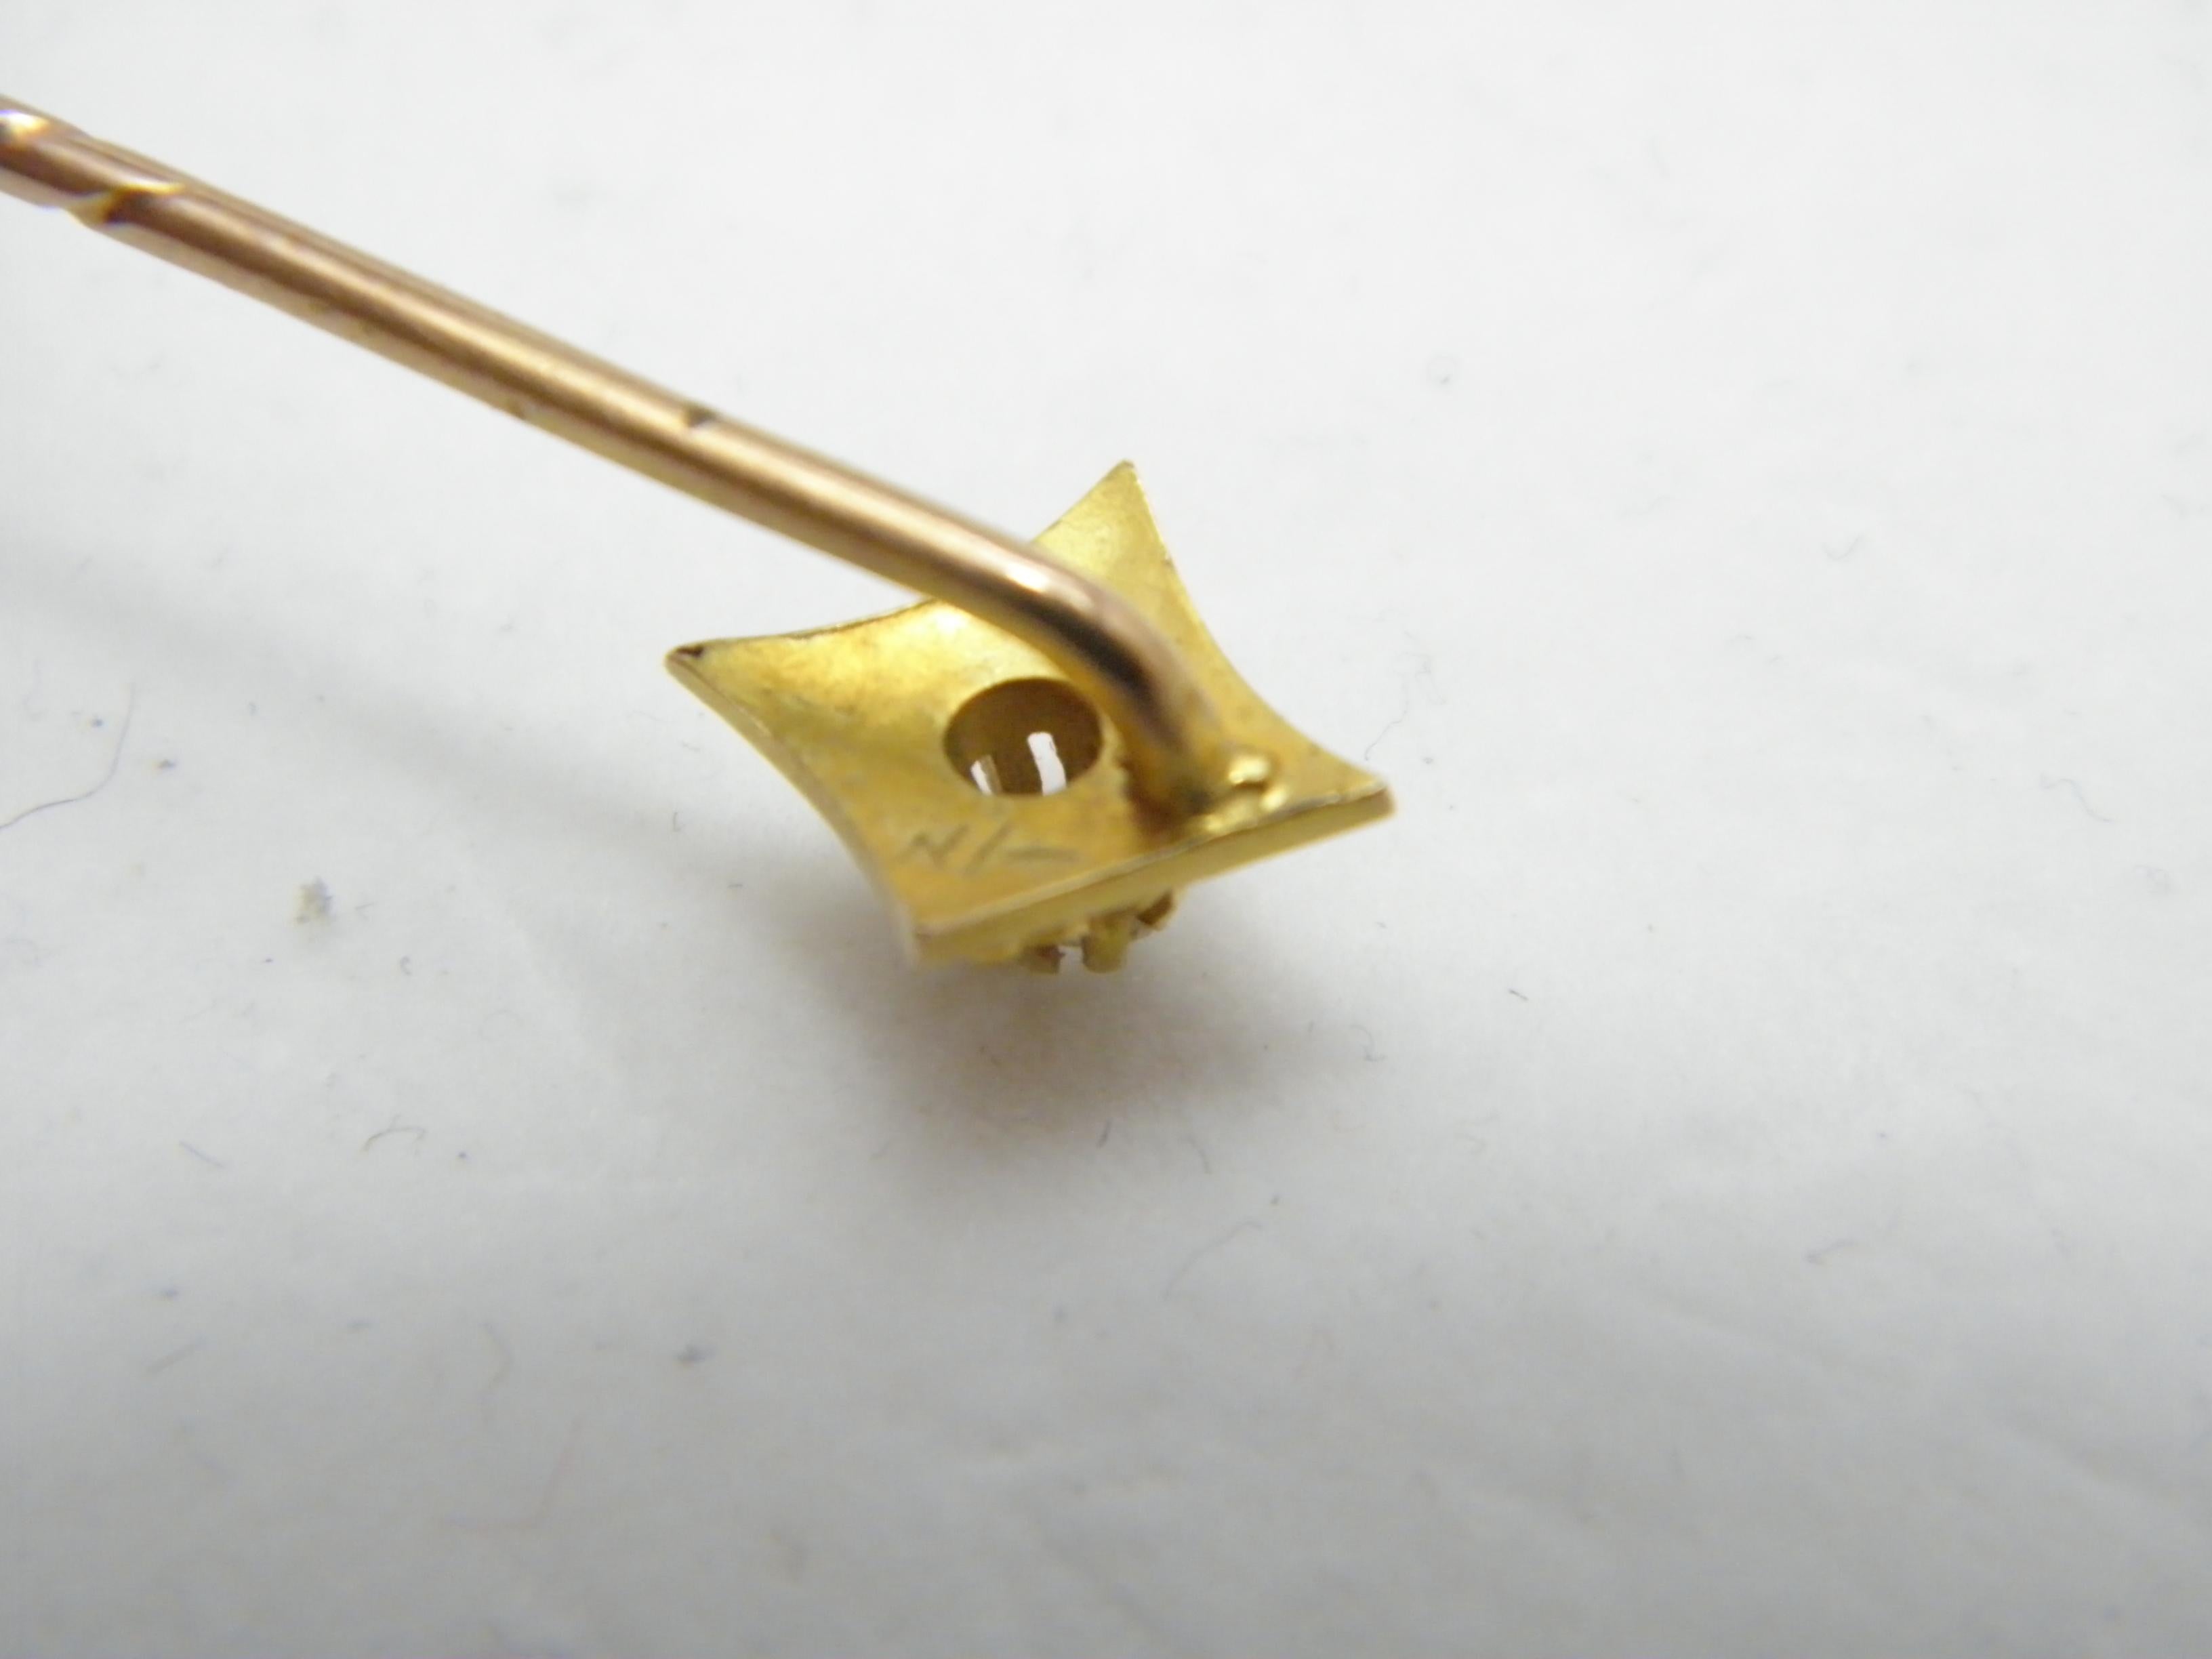 Antique 15ct Gold Diamond Stock Pin Brooch c1860 Heavy 625 Purity Tie Lapel Hat For Sale 4